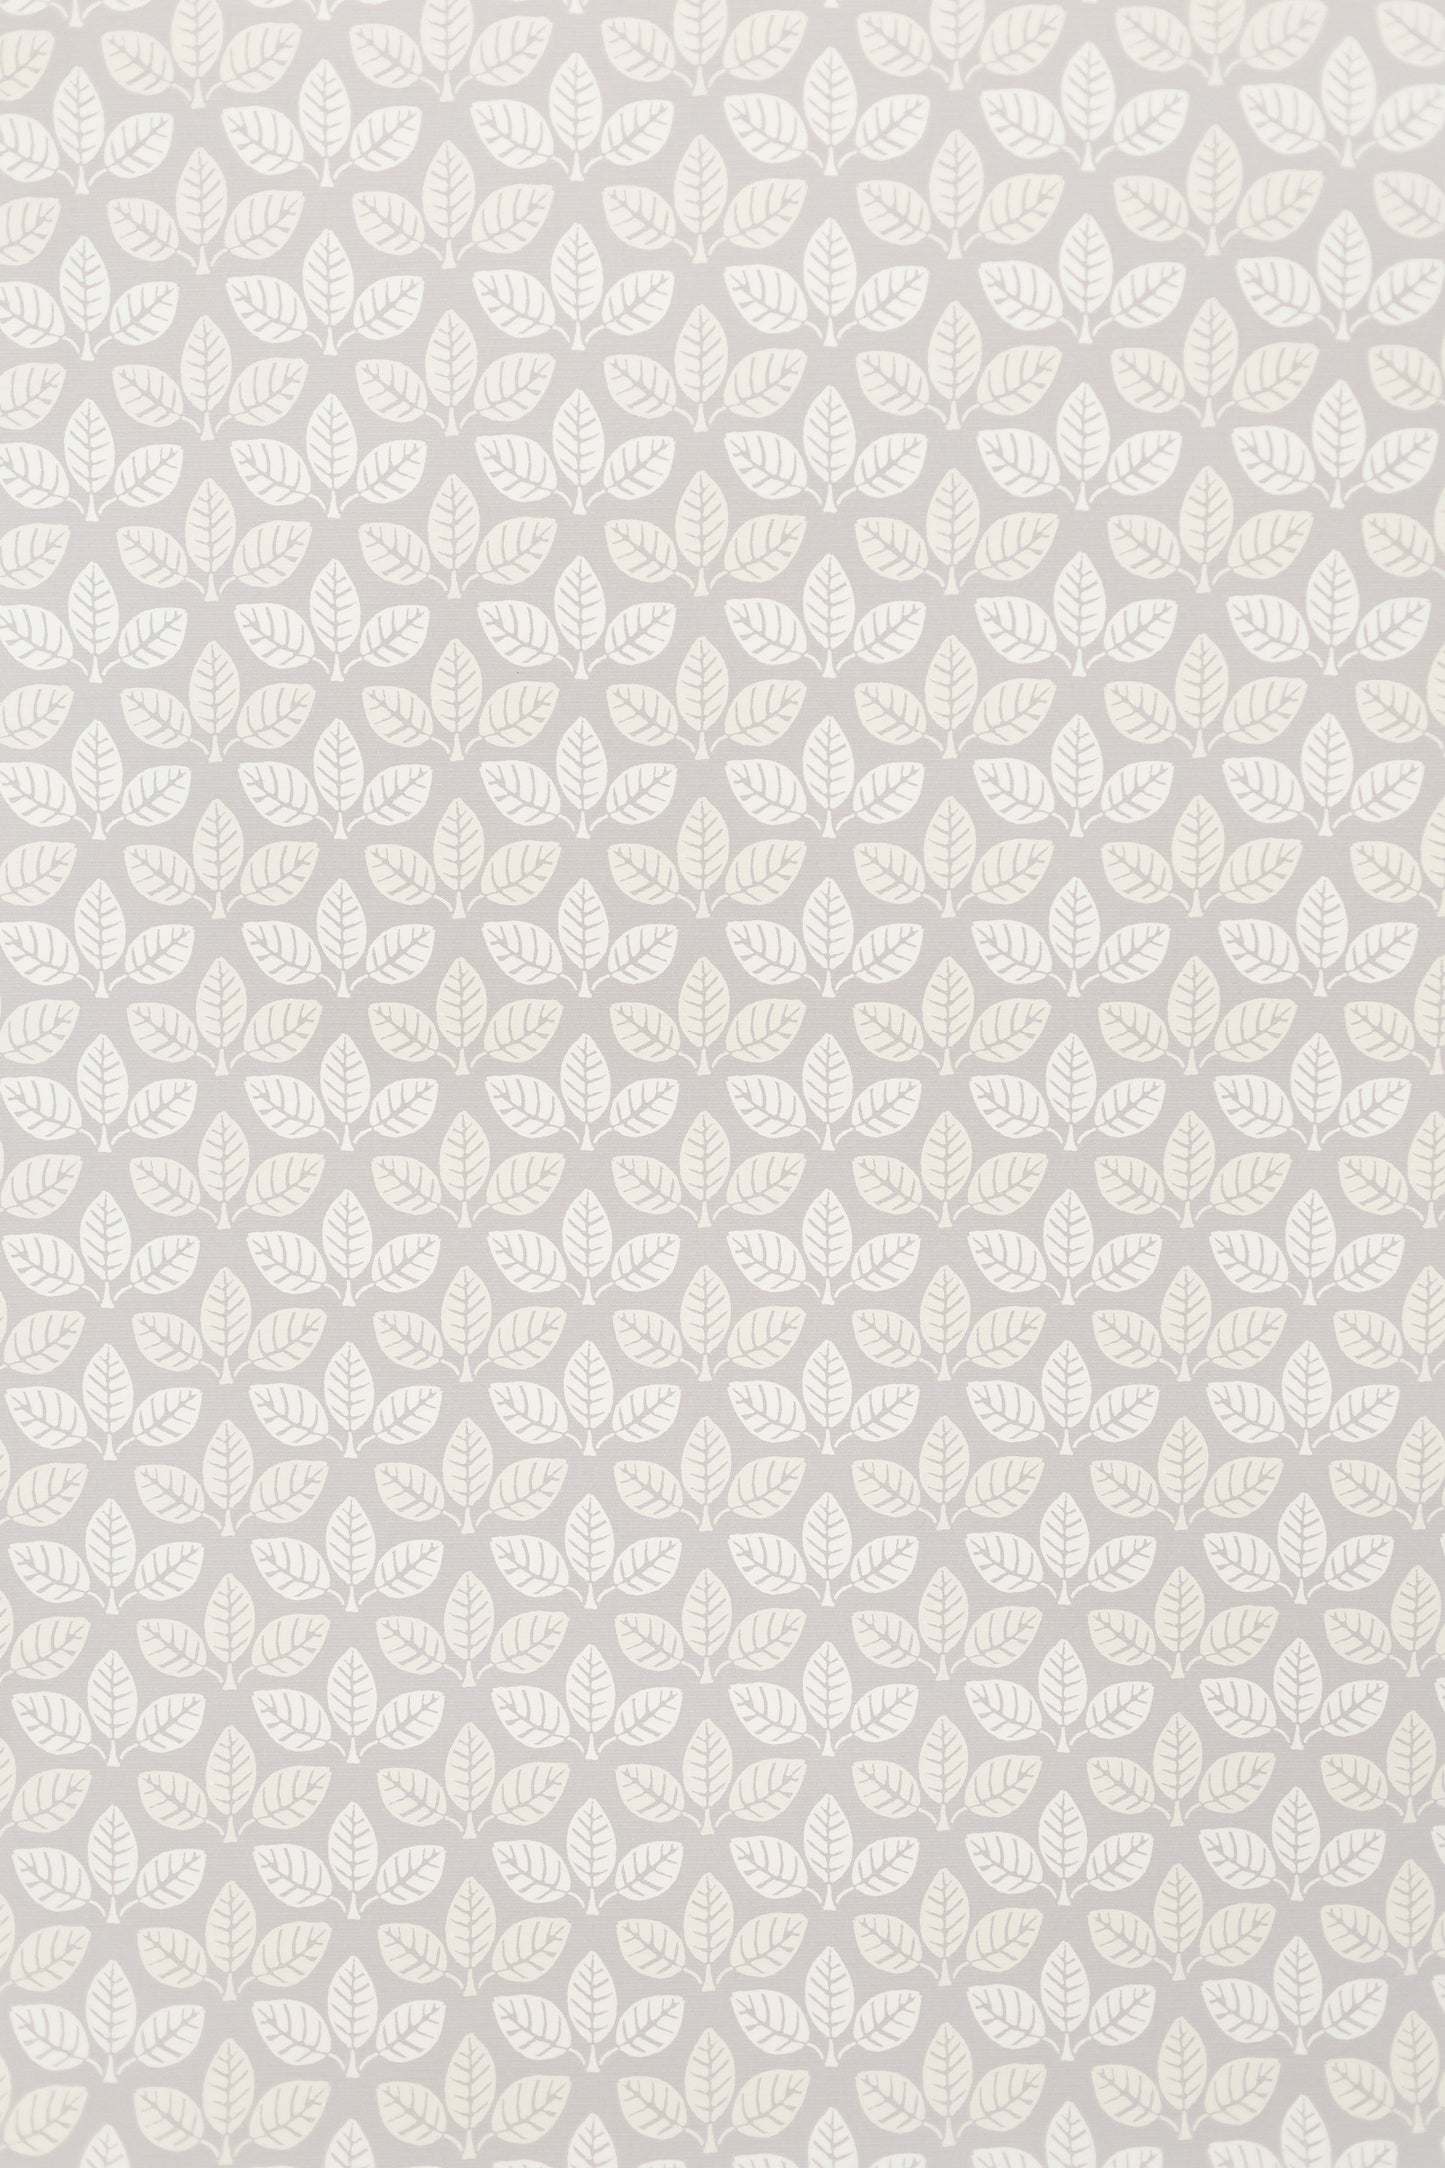 Leaf Motif - The Mary Engelbreit Collection